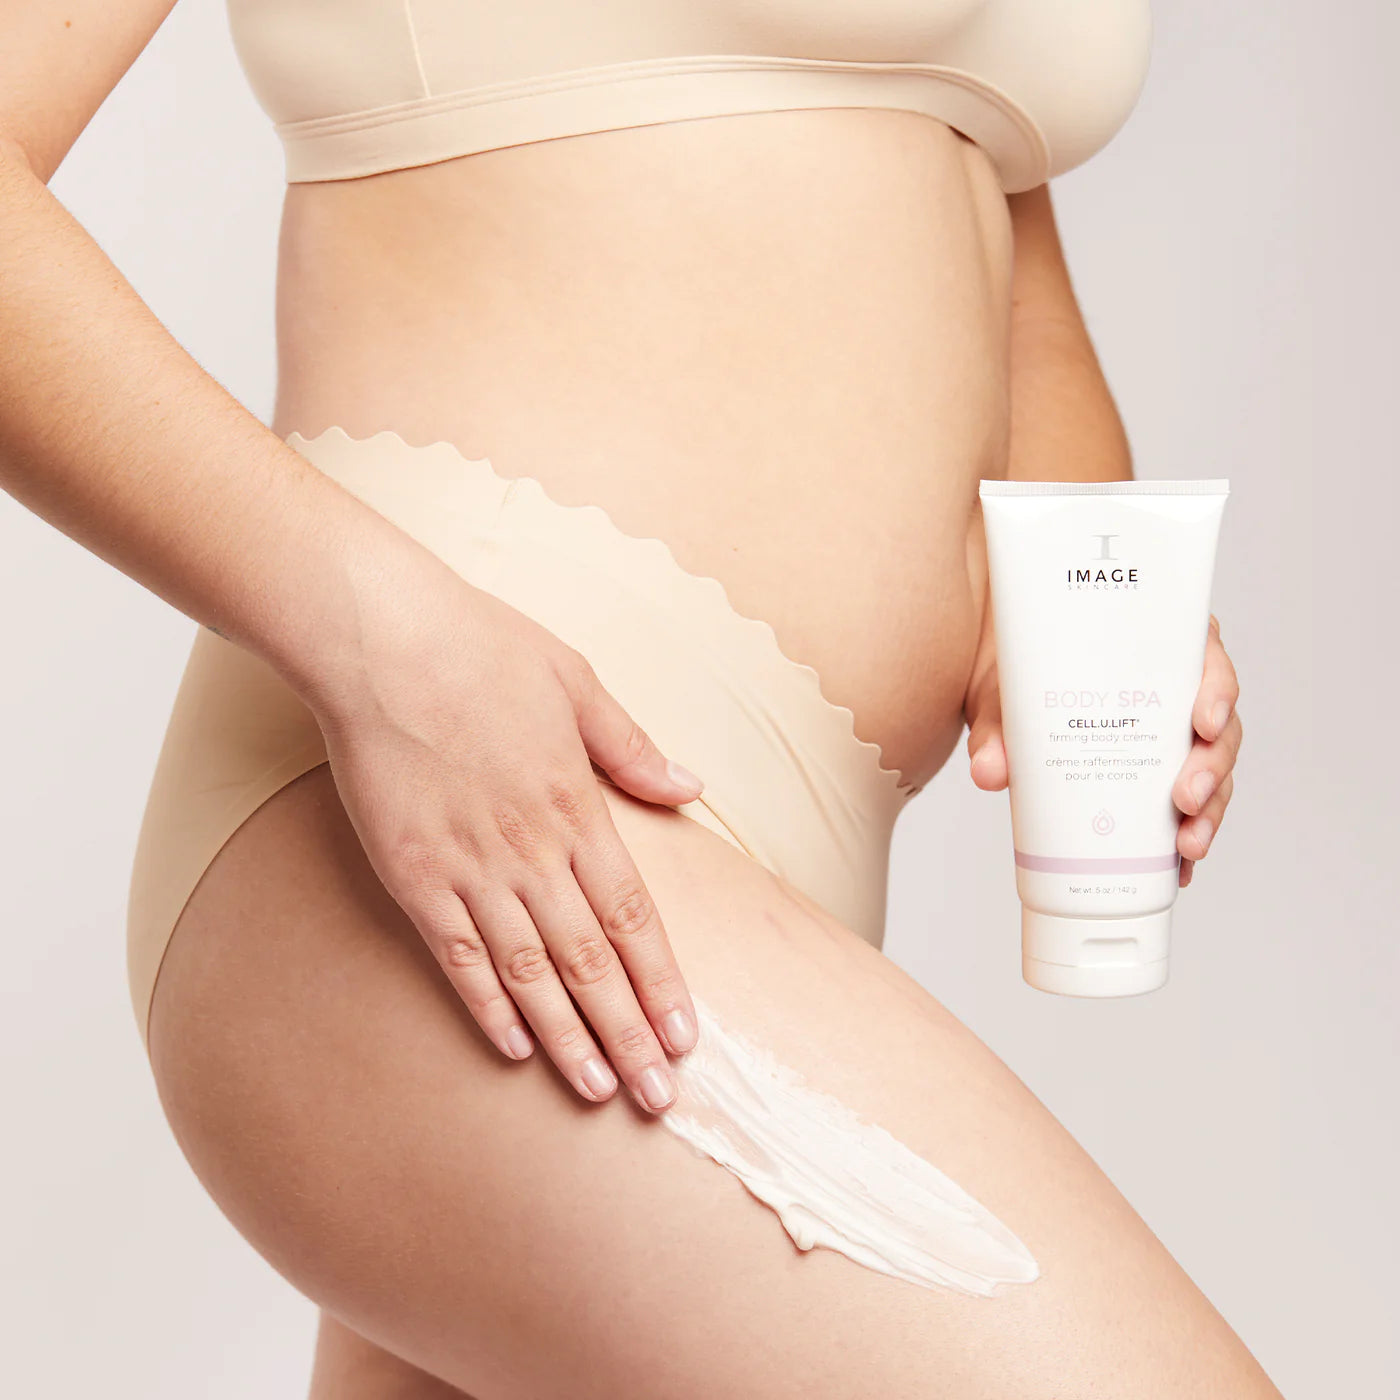 IMAGE SKINCARE BODY SPA CELL.U.LIFT® firming body crème